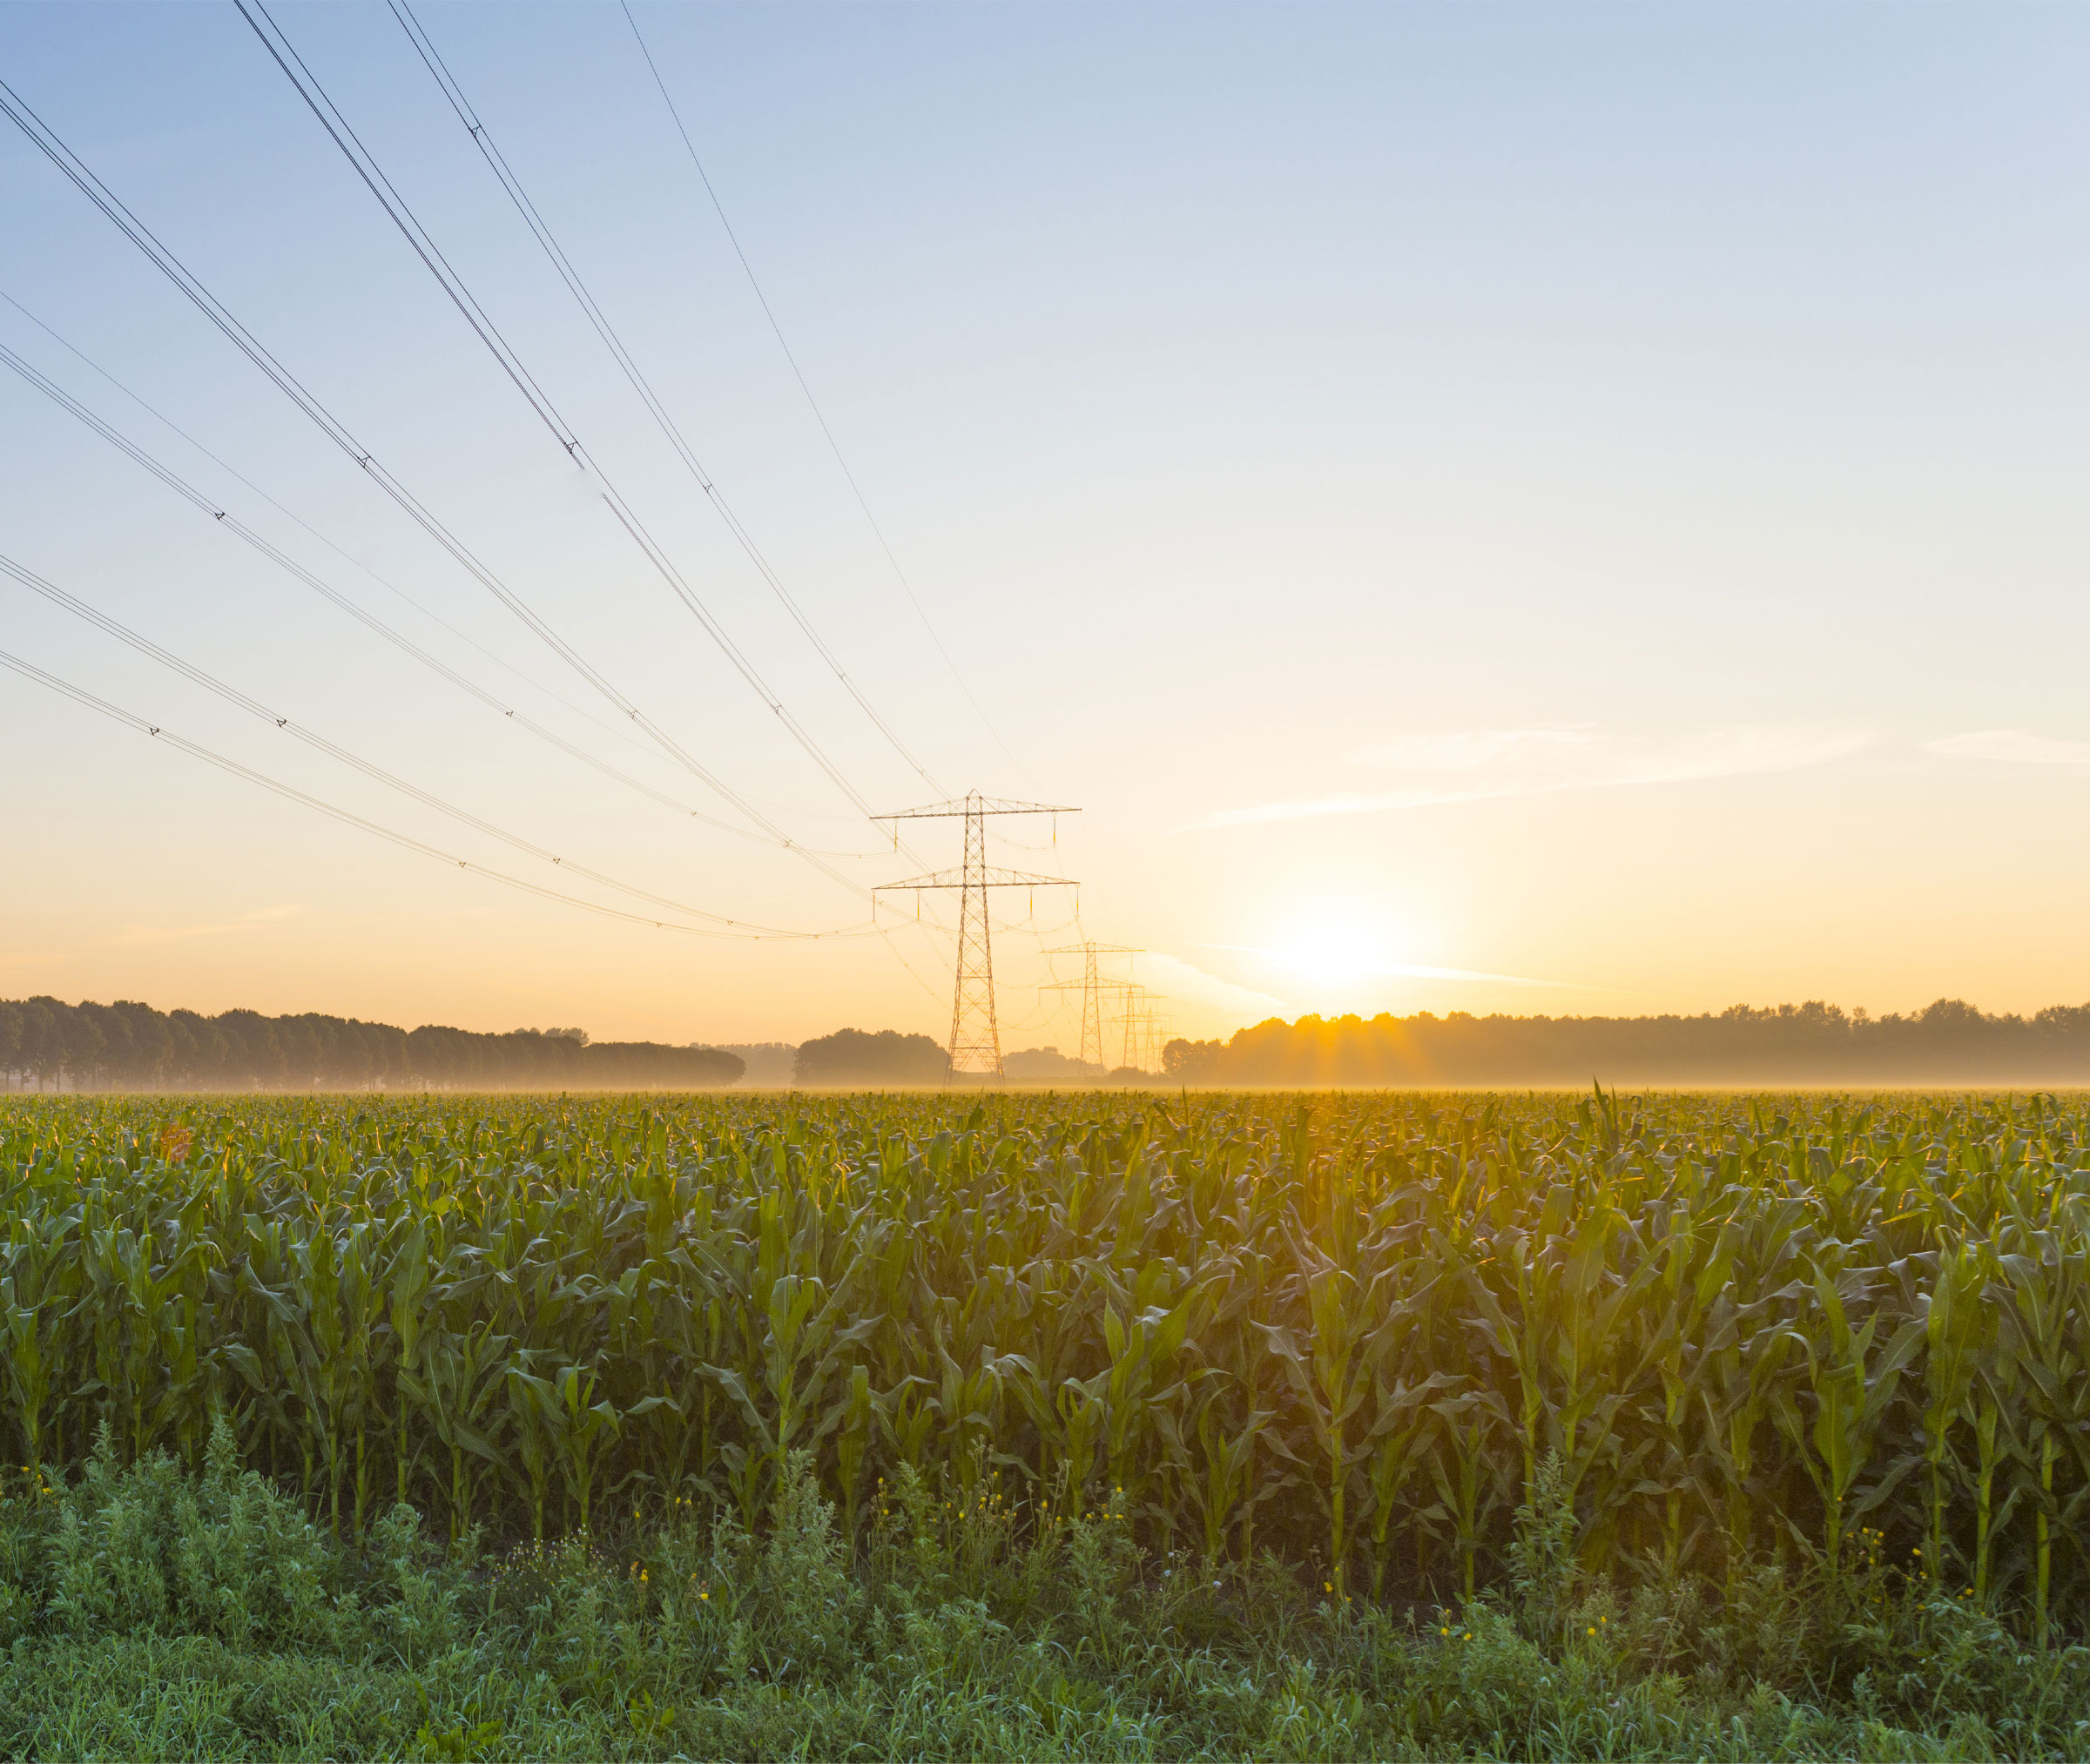 Electrical tower at sunset over a cornfield